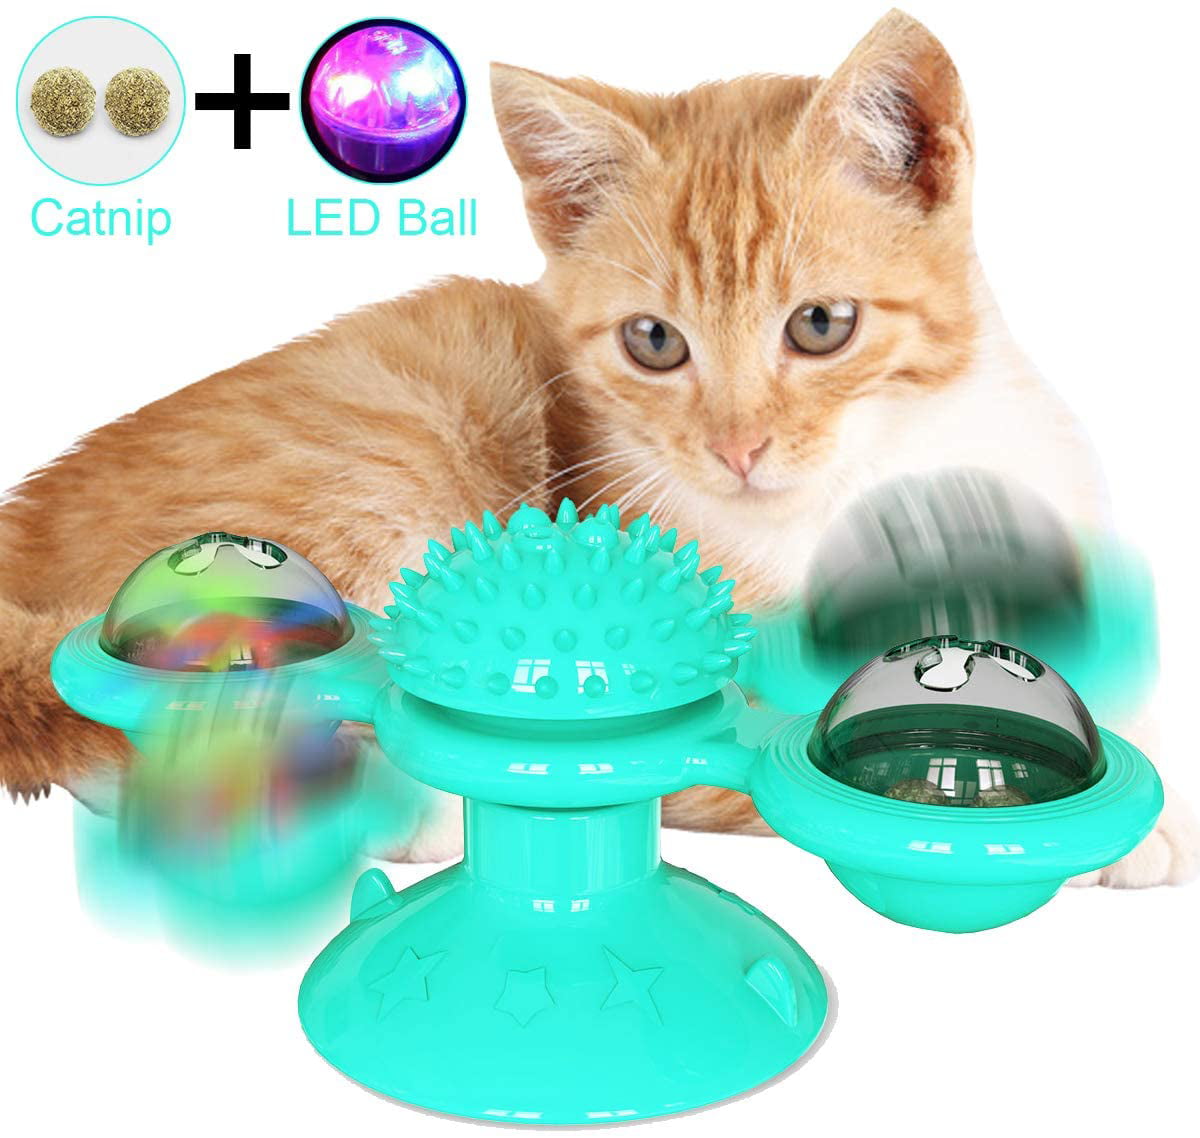 Nincee Cat Interaction Spinner Toy,LED Flash Light Creative Transparent Windmill Turntable Cat Molar/Massage Toy Yellow